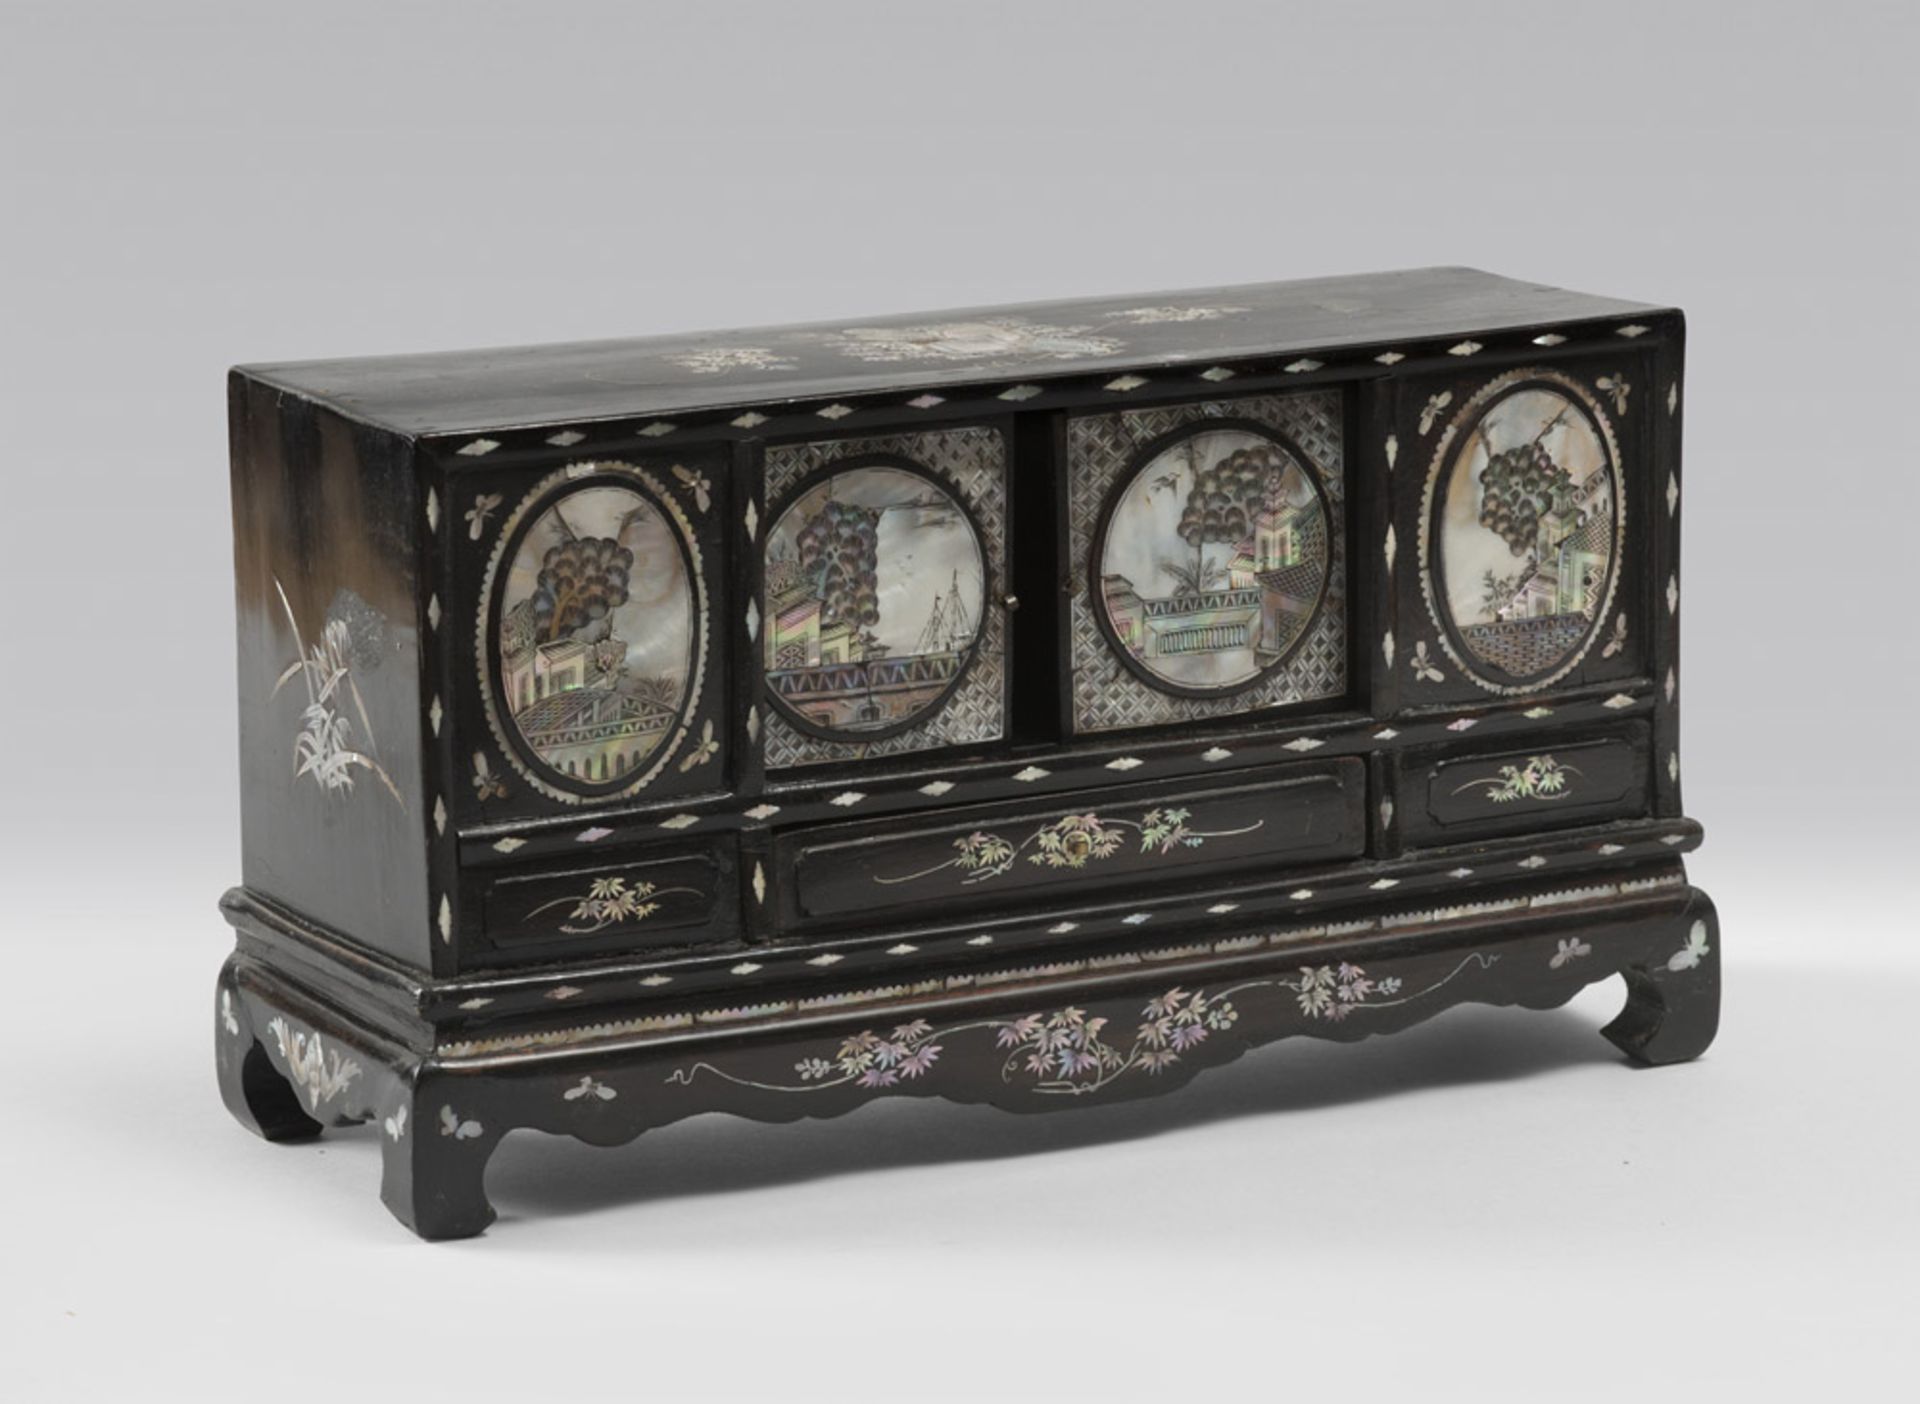 A CHINESE BLACK LACQUERED WOOD JEWERLY BOX, 20TH CENTURY